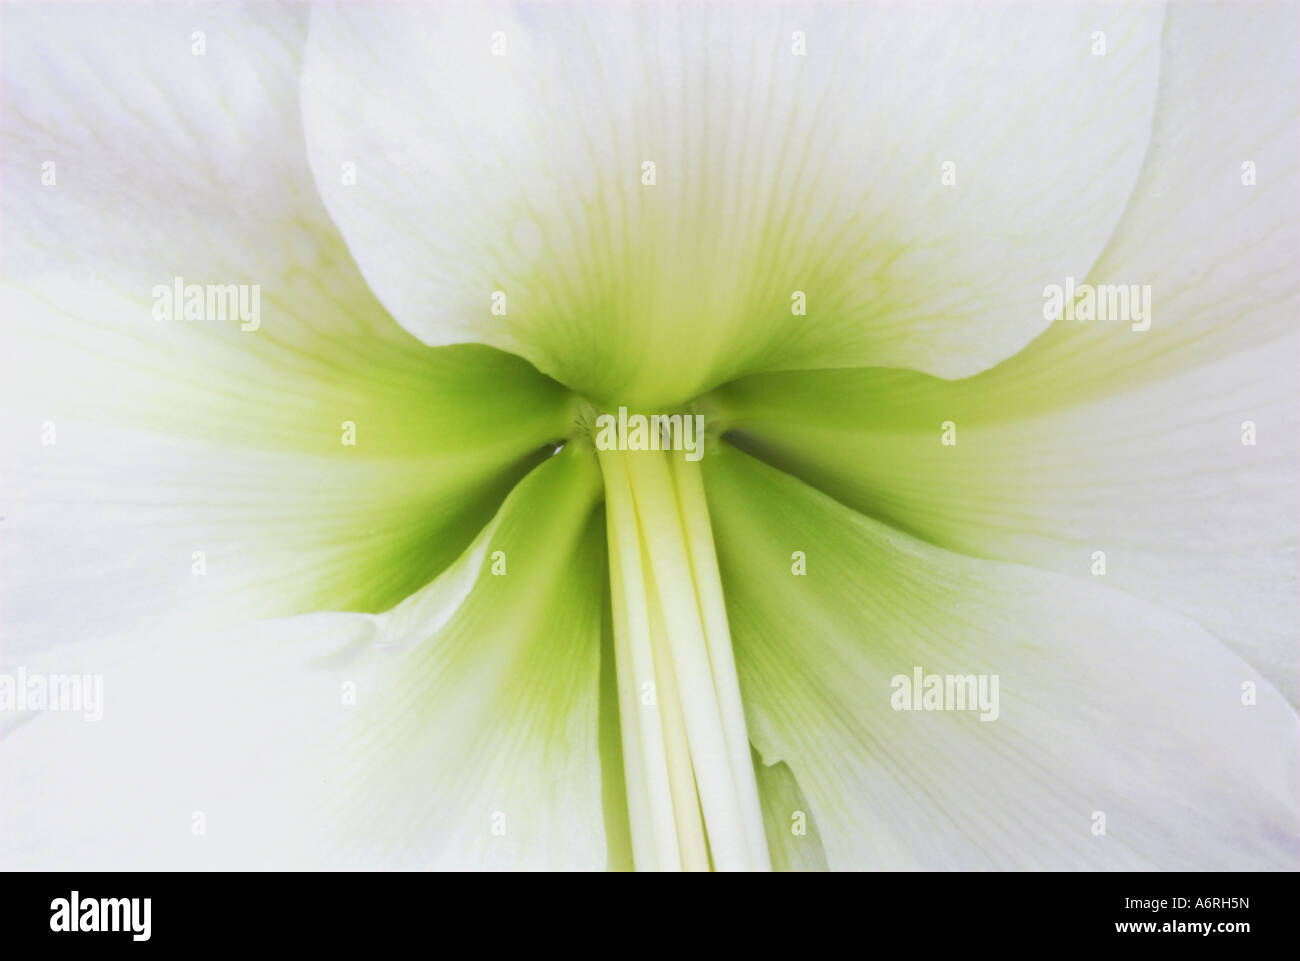 Amarylis - heart of a bloom Stock Photo